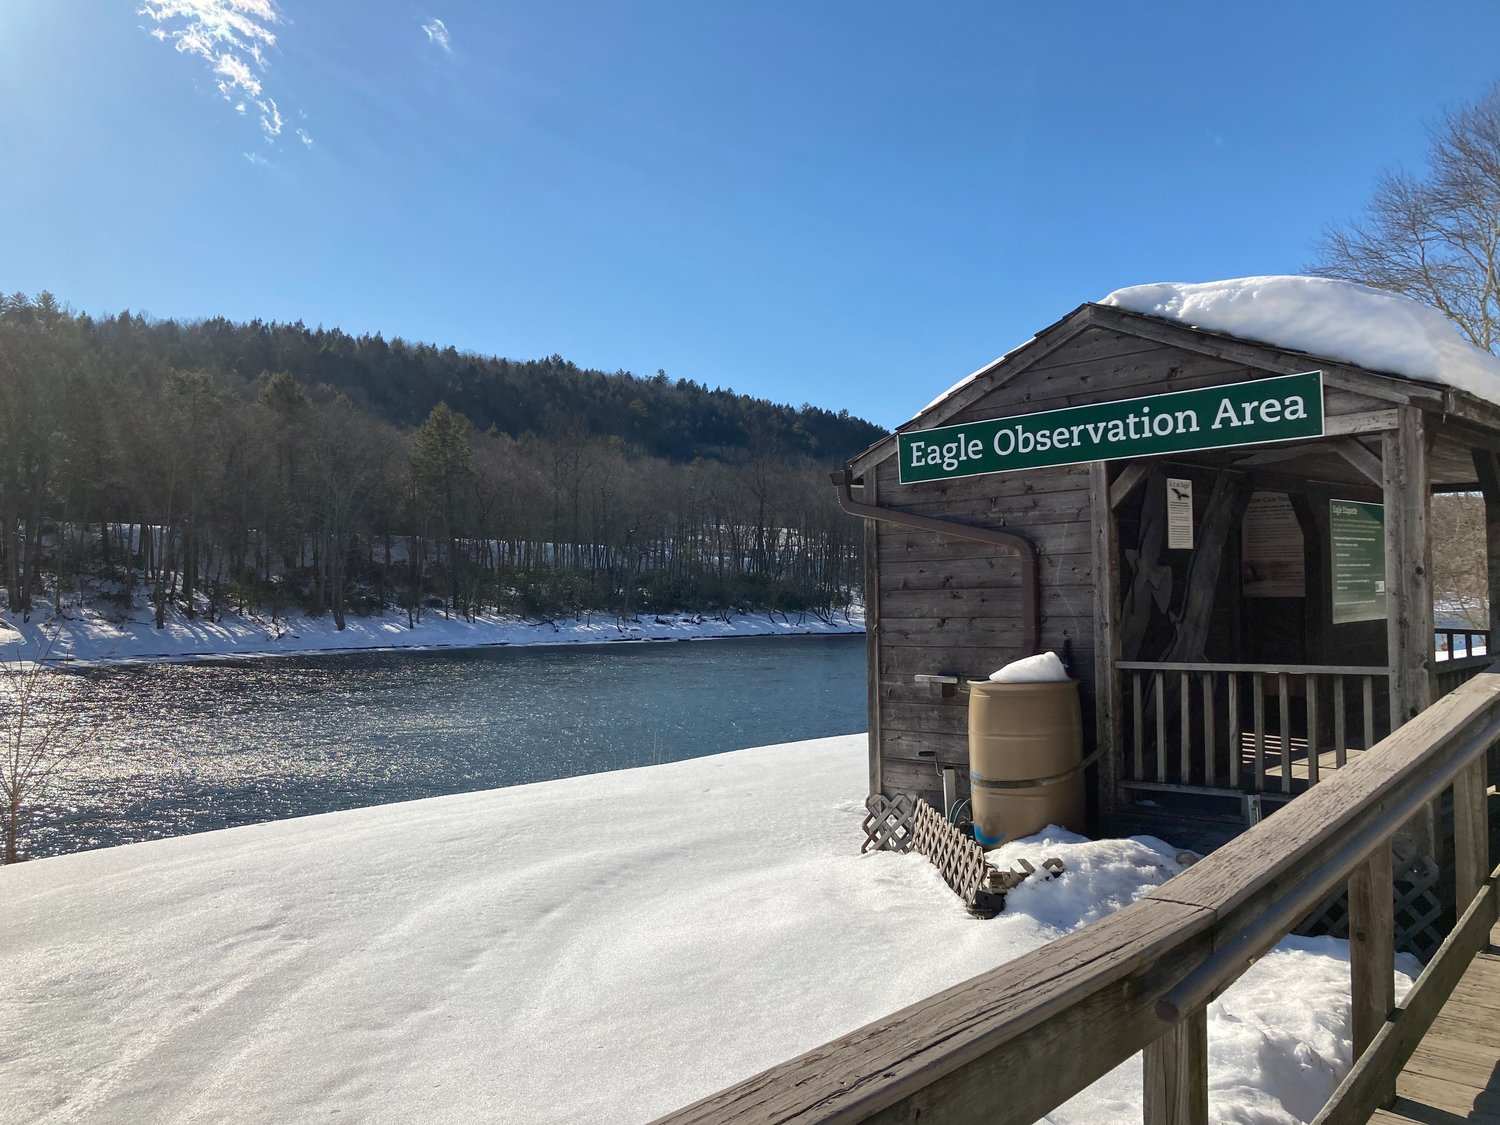 The Barbara Yeaman Eagle Observation Area along Route 97 in Minisink Ford, NY, provides ramp access that enables all to view wintering eagles along the Delaware River. Visit https://delawarehighlands.org/eagles/wintering-eagles/ for additional access sites.